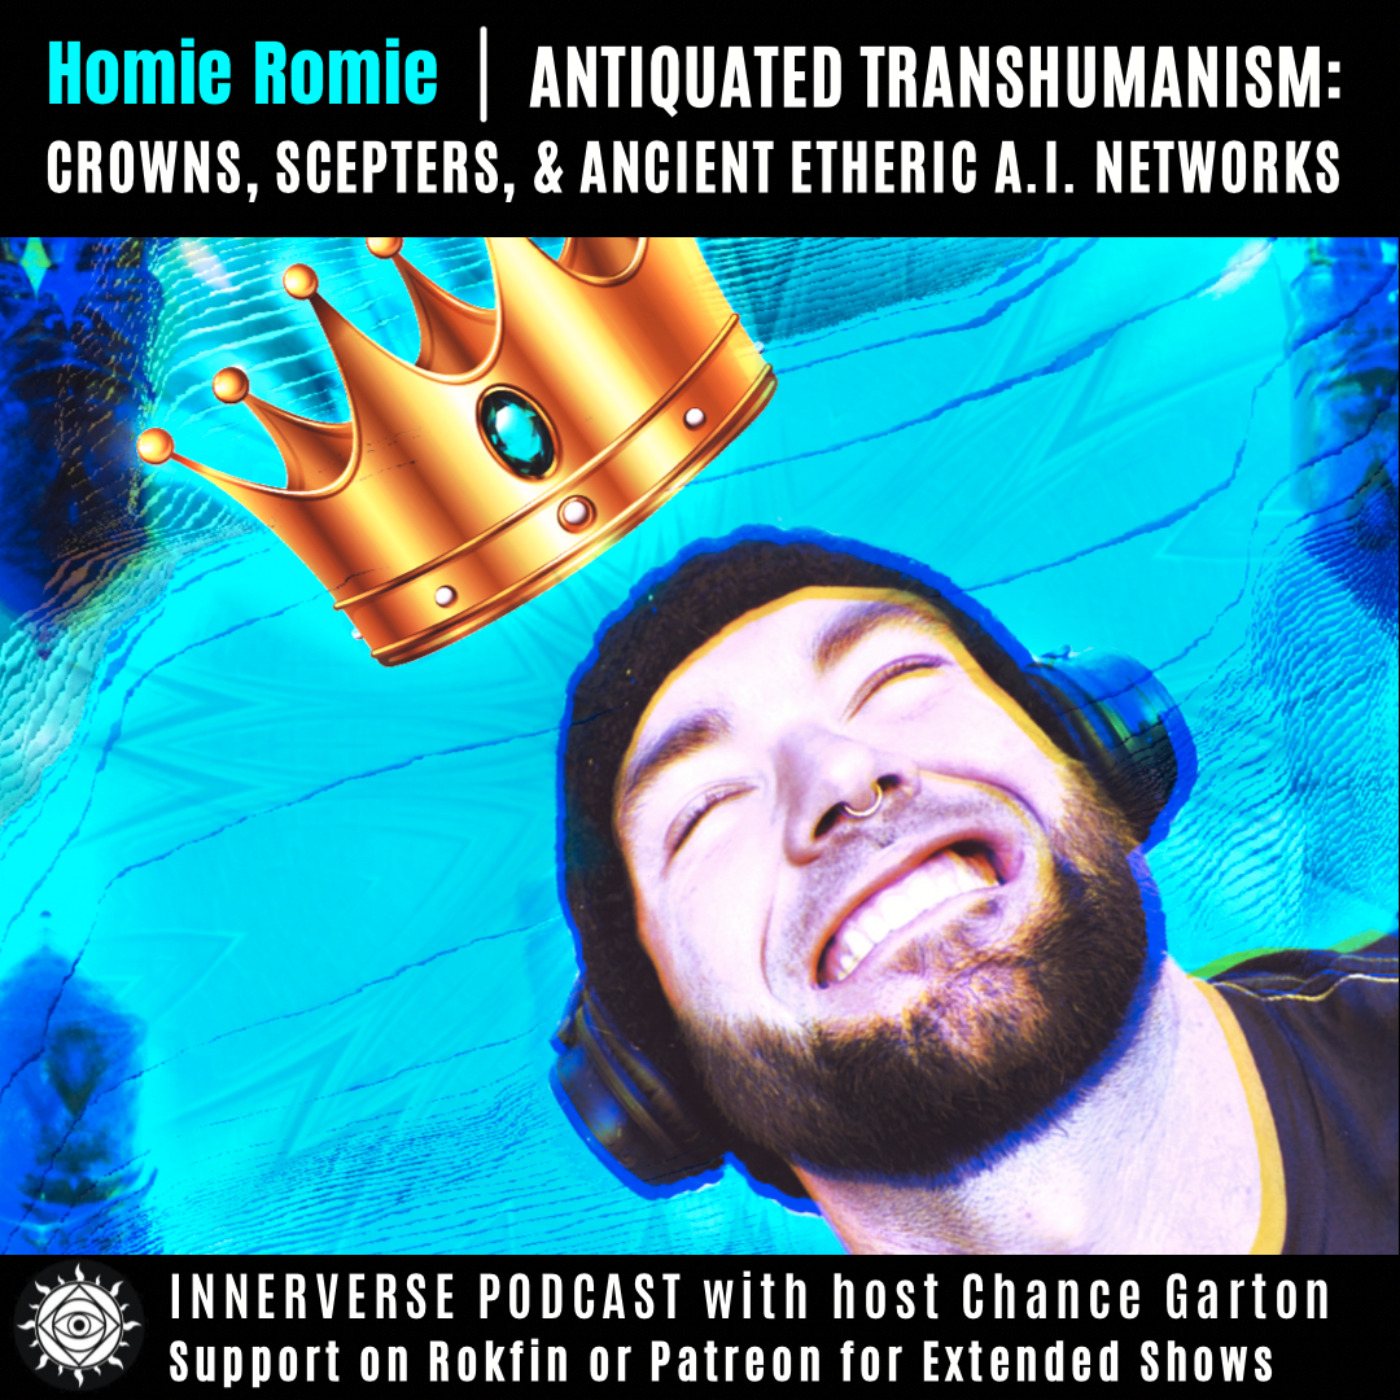 Homie Romie | Antiquated Transhumanism: Crowns, Scepters, & Ancient Etheric AI Networks